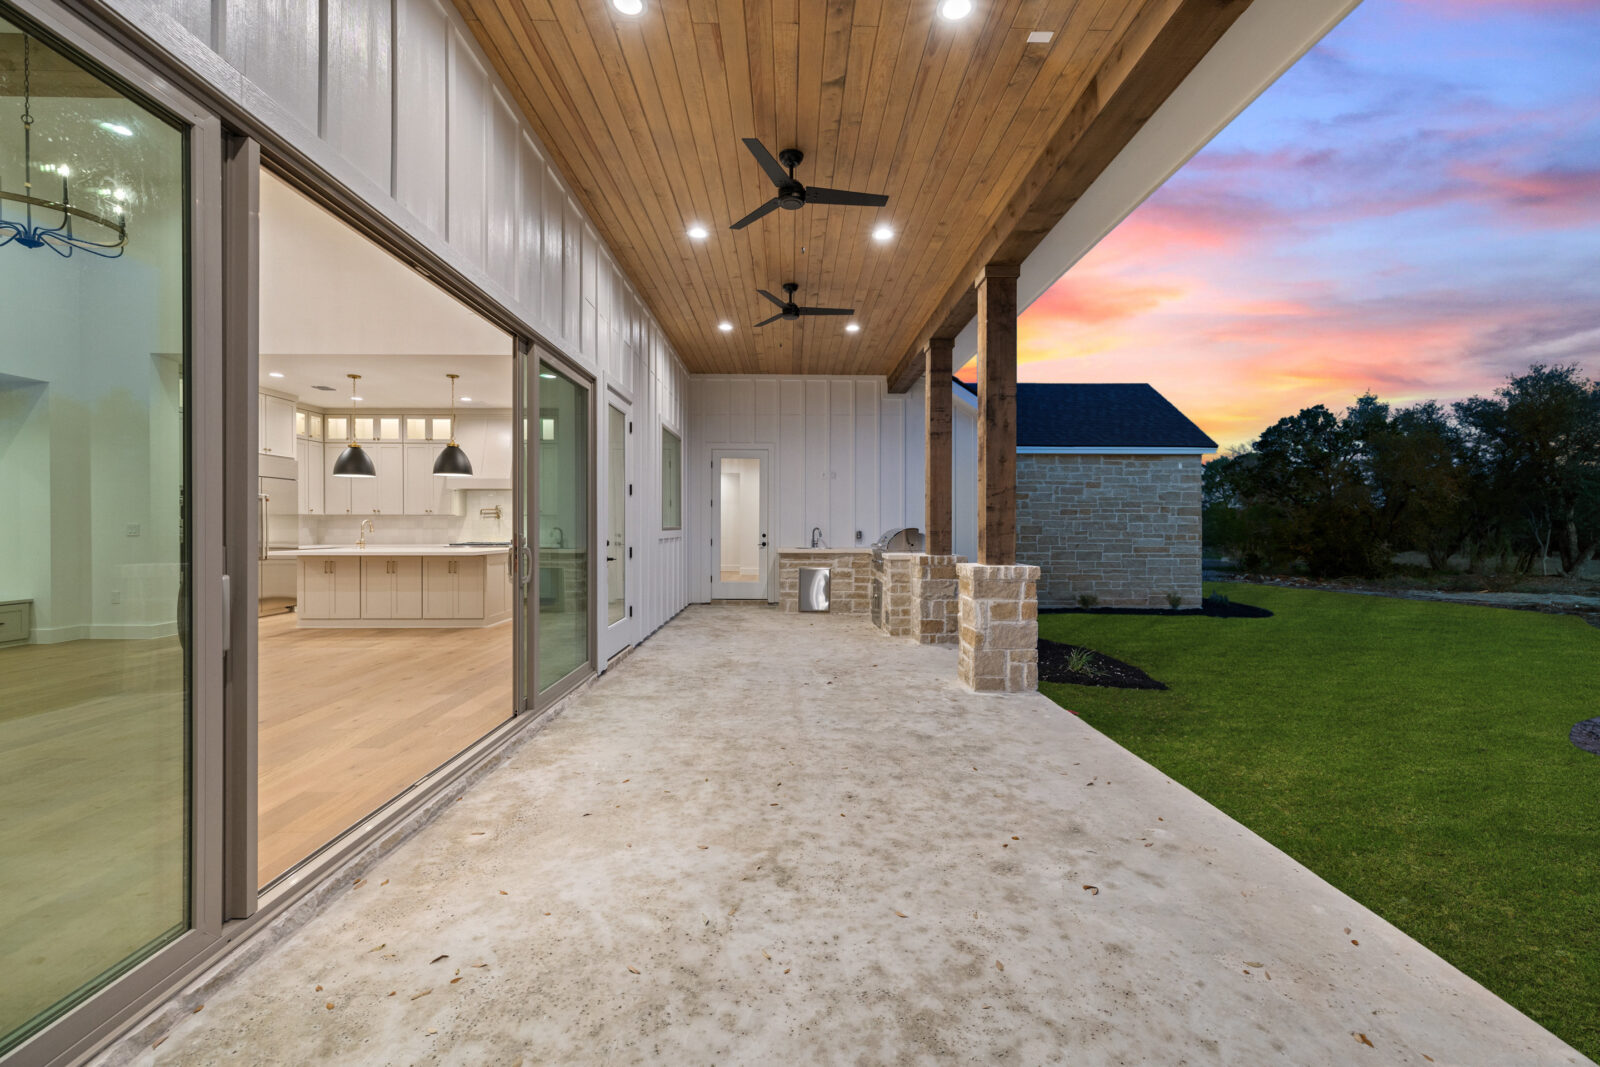 Southerly Homes' custom home harmonizing with the natural surroundings, Austin, United States.